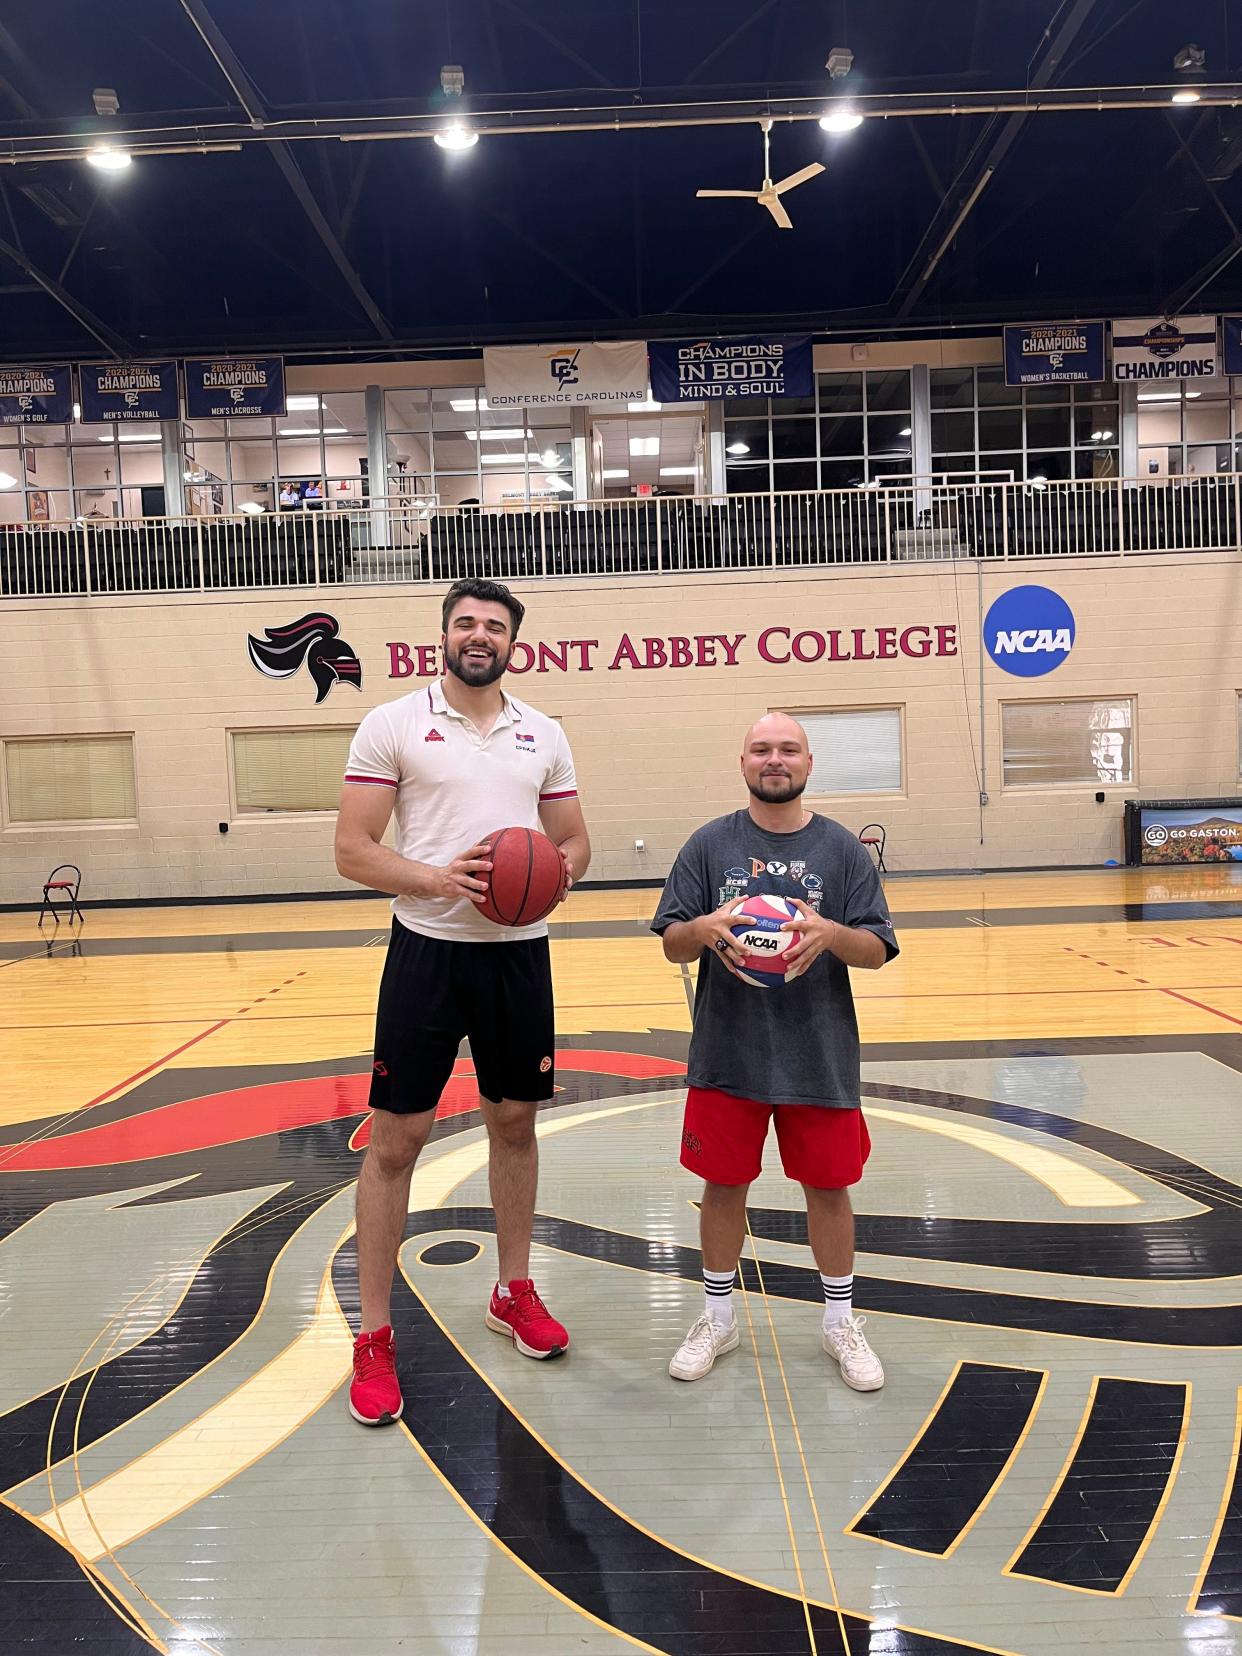 Boško Bojović and Conrad Hill are two international student athletes at Belmont Abbey College who graduated alongside 225 of their peers Saturday, May 14, at Belmont Abbey College’s Mary Help of Christians Basilica Piazza.